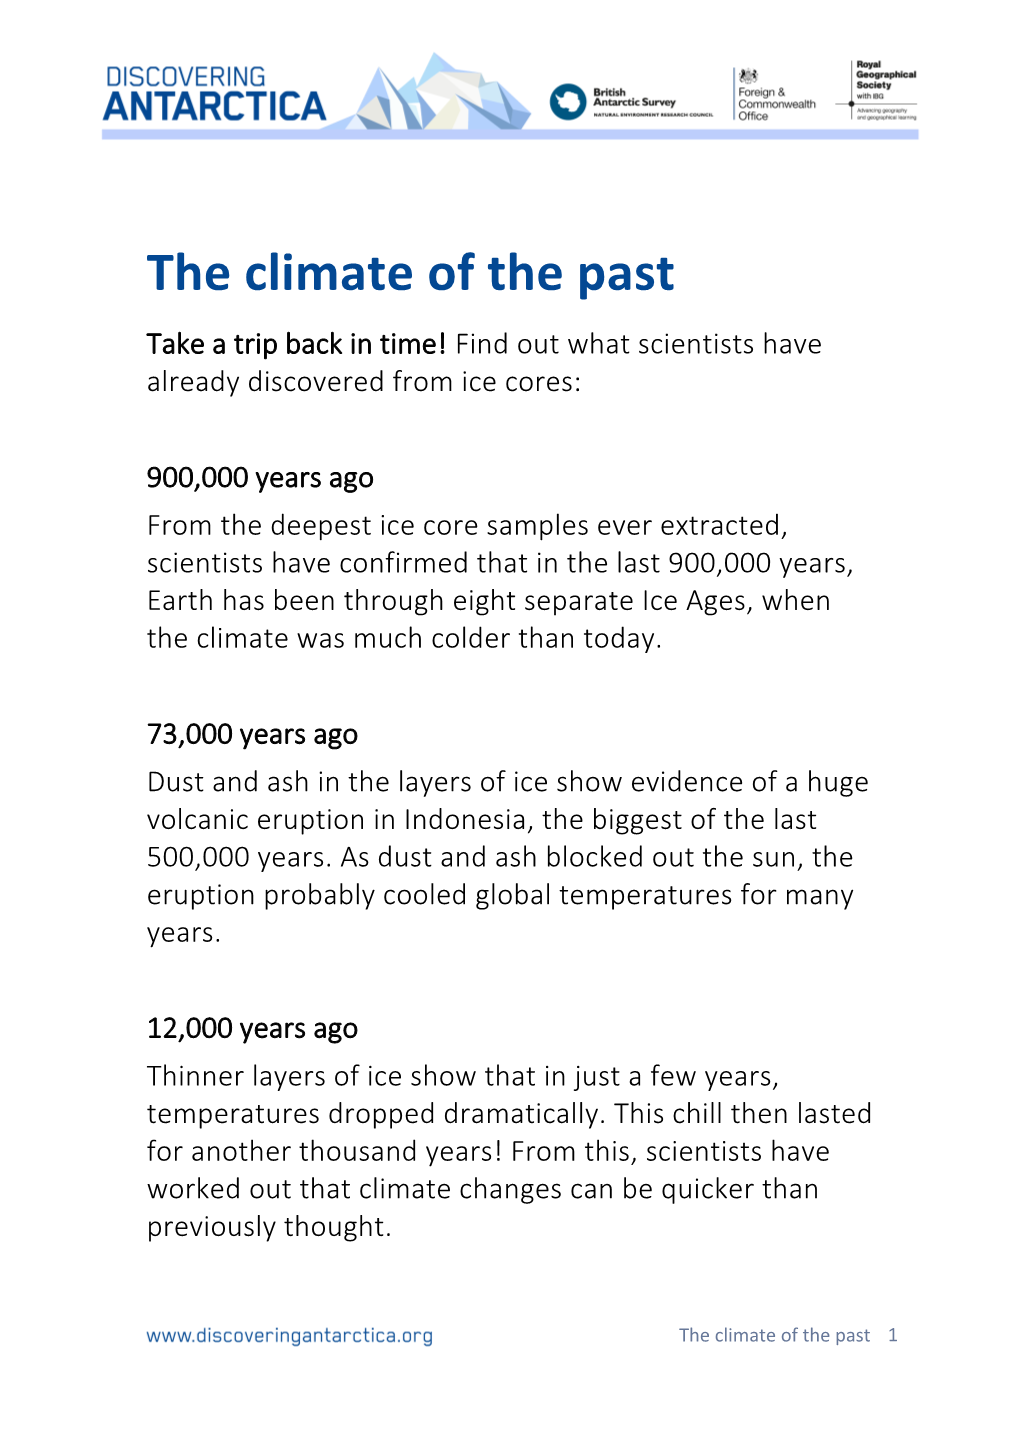 The Climate of the Past